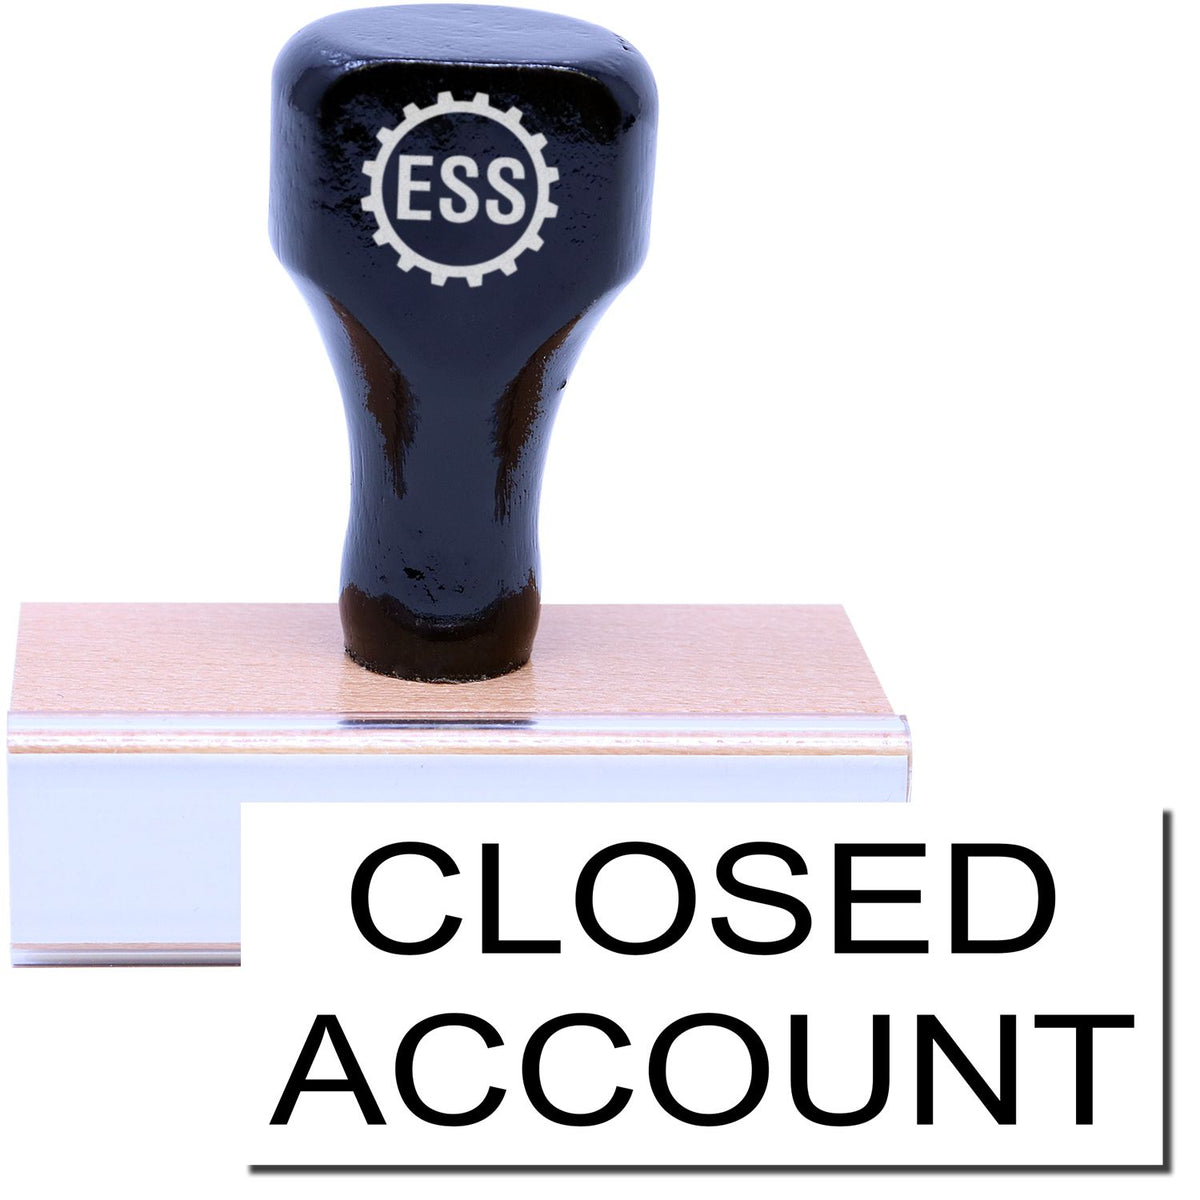 A stock office rubber stamp with a stamped image showing how the text &quot;CLOSED ACCOUNT&quot; in a large font is displayed after stamping.